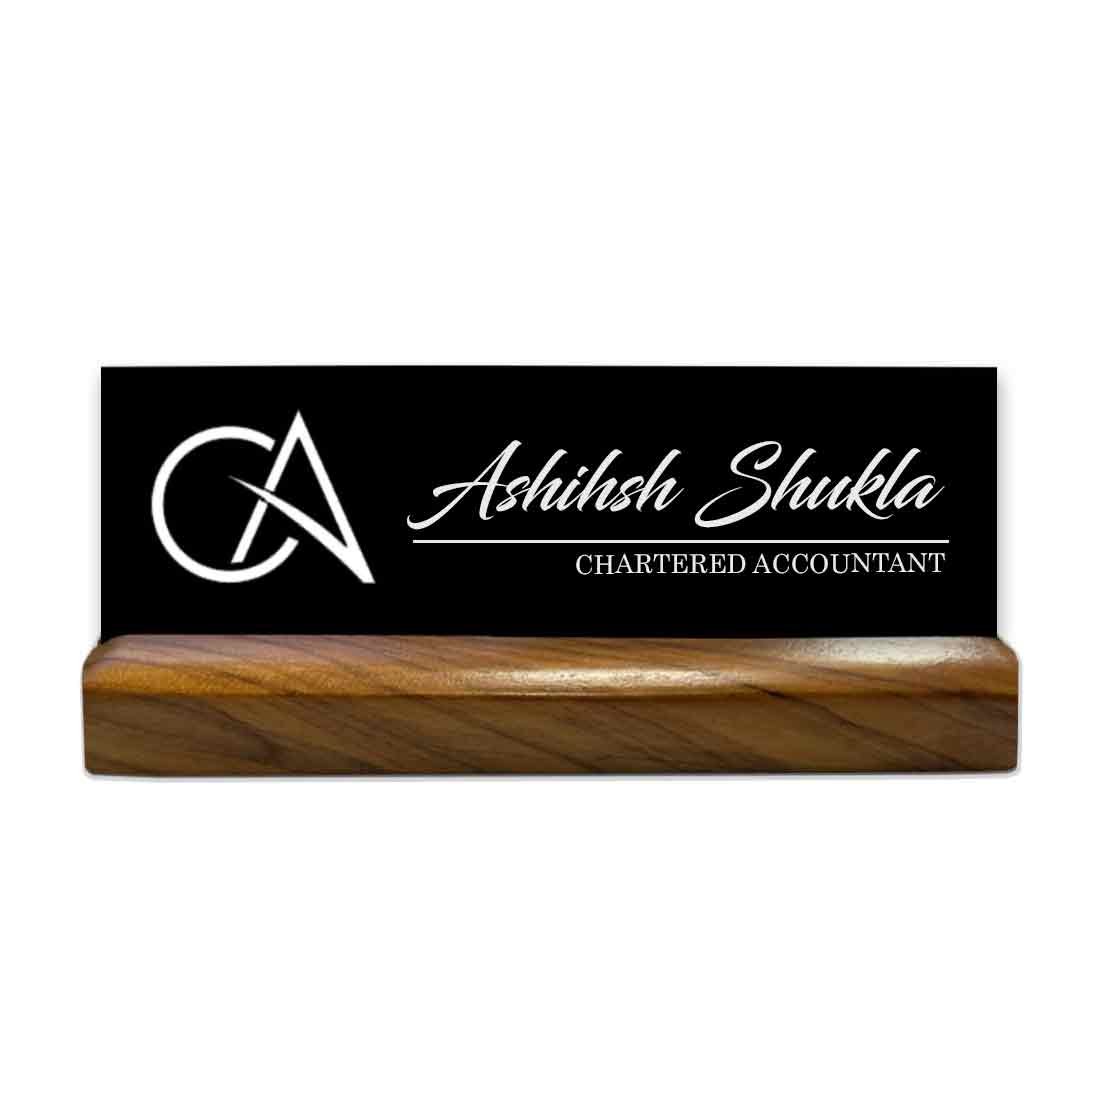 Personalised Desk Name Plate for CA Wooden Table Nameplate - Chartered Accountant